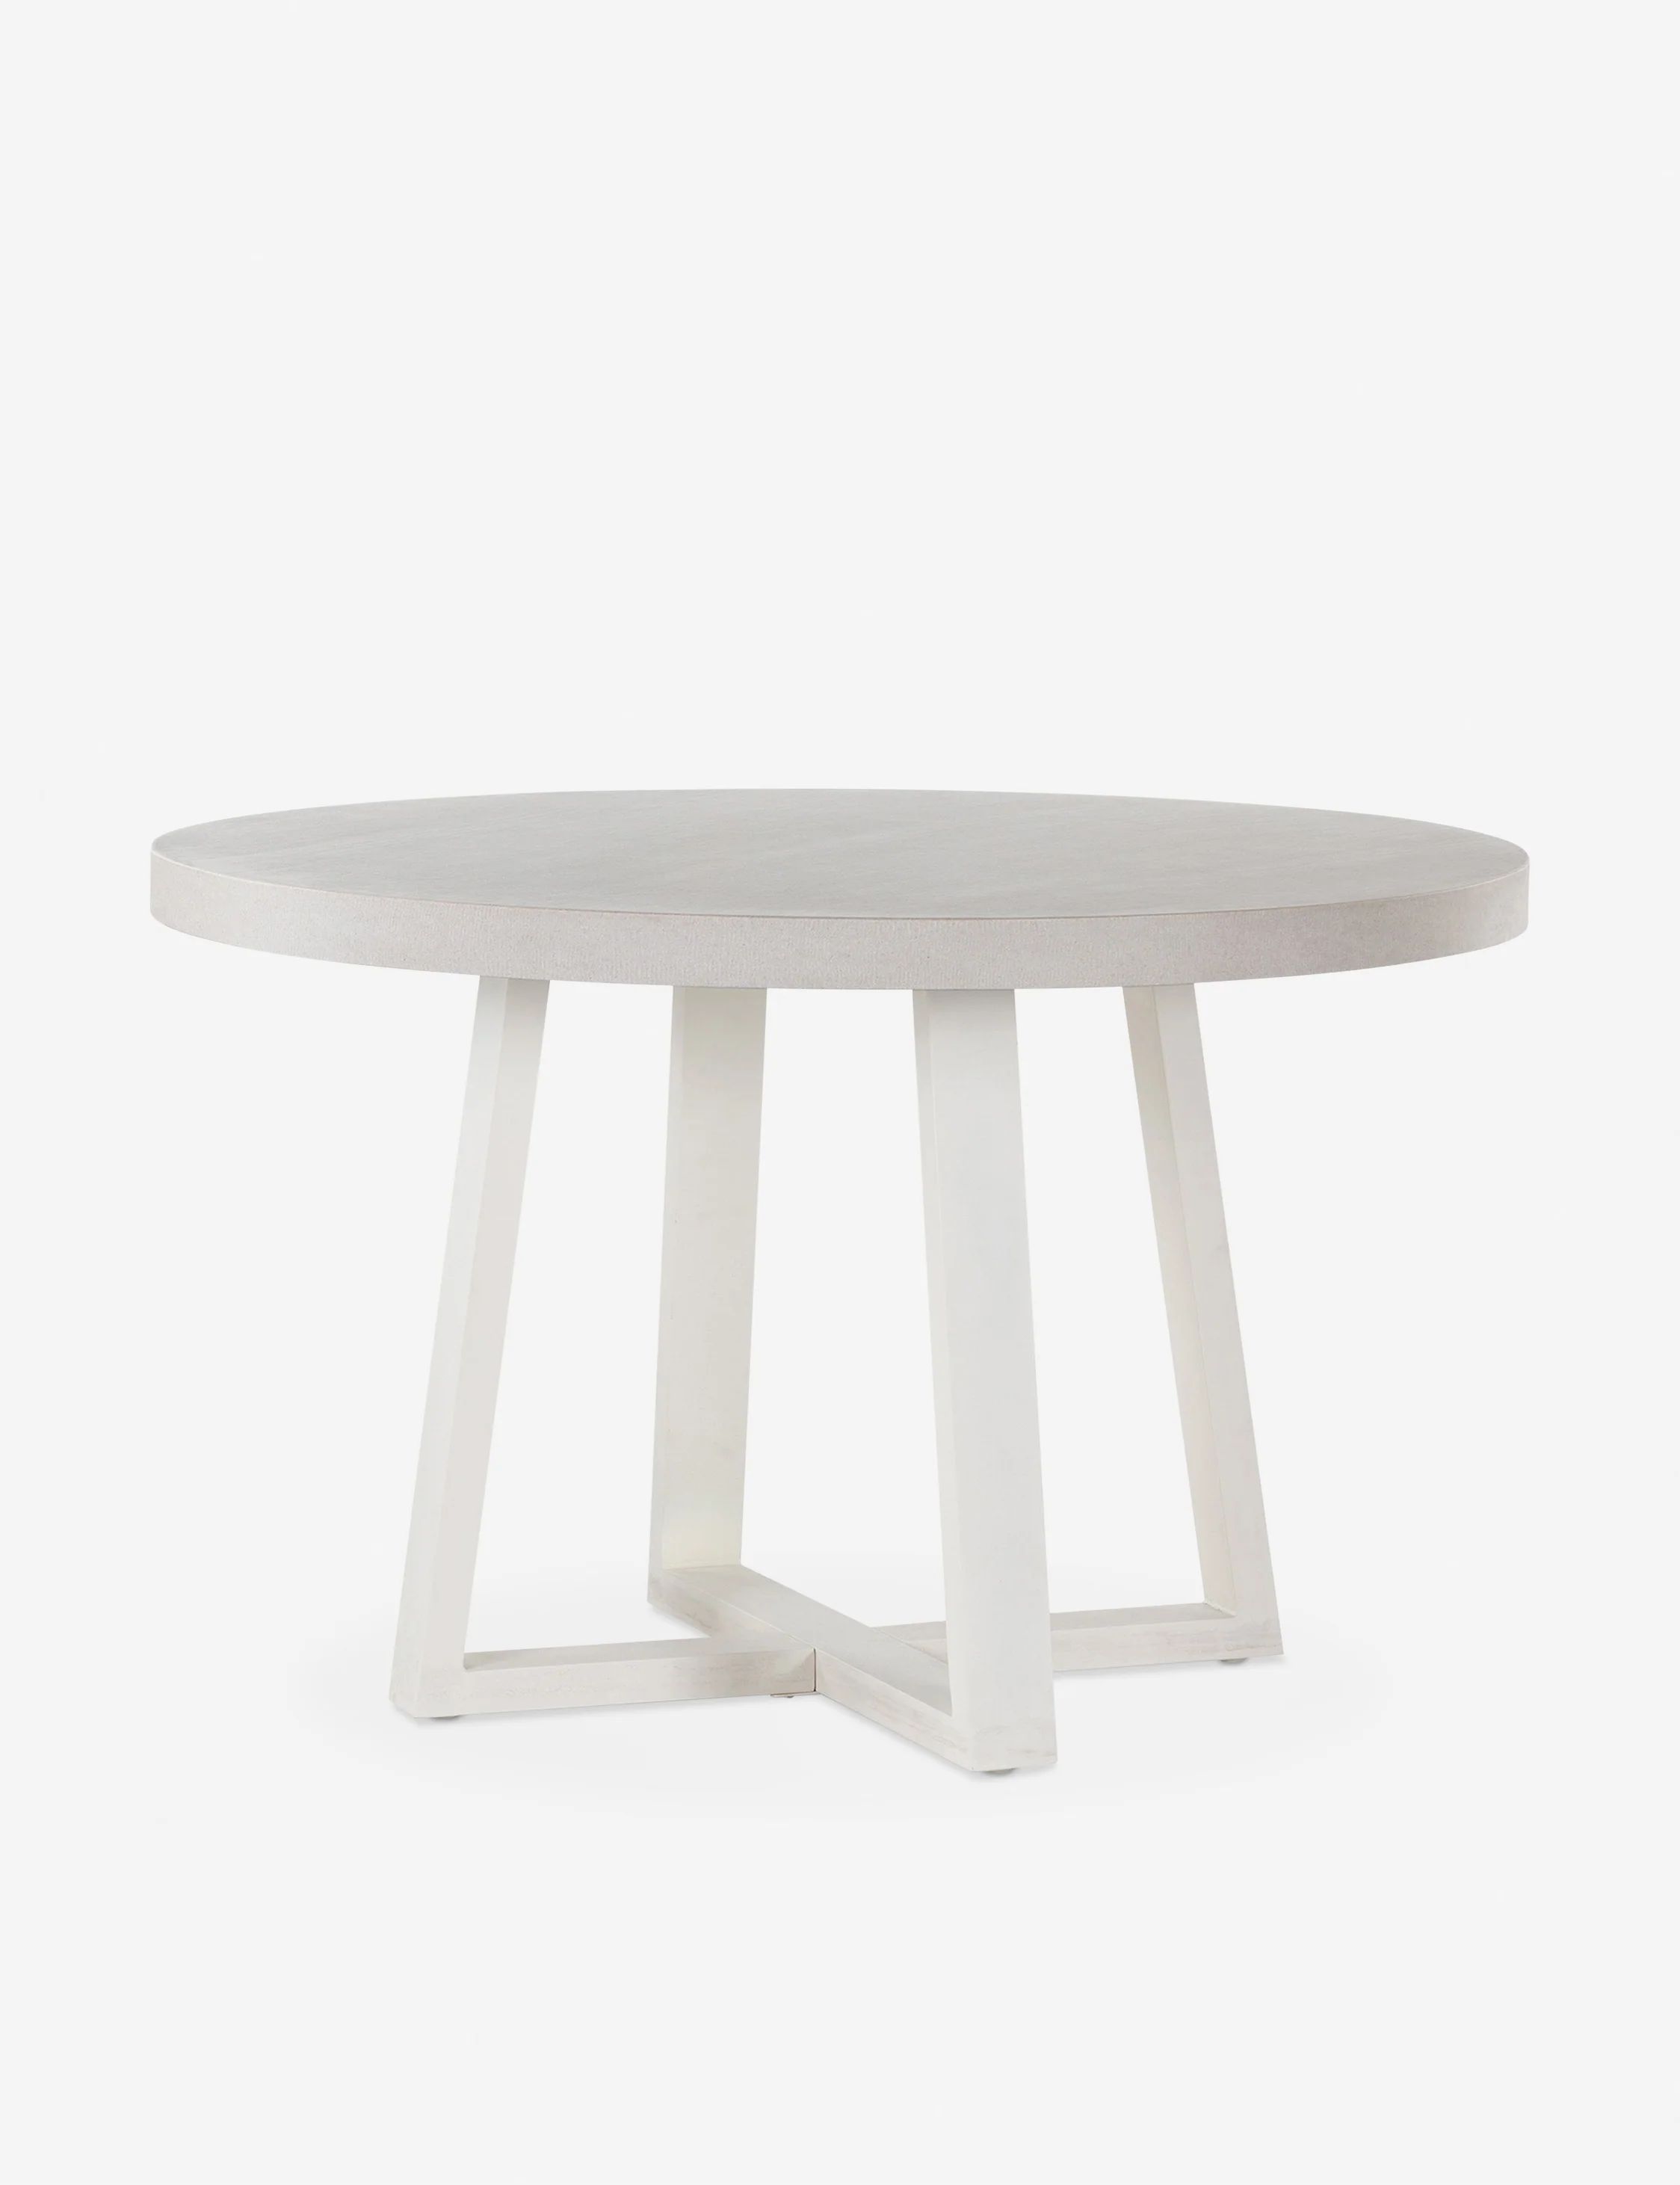 Hollis Indoor / Outdoor Round Dining Table | Lulu and Georgia 